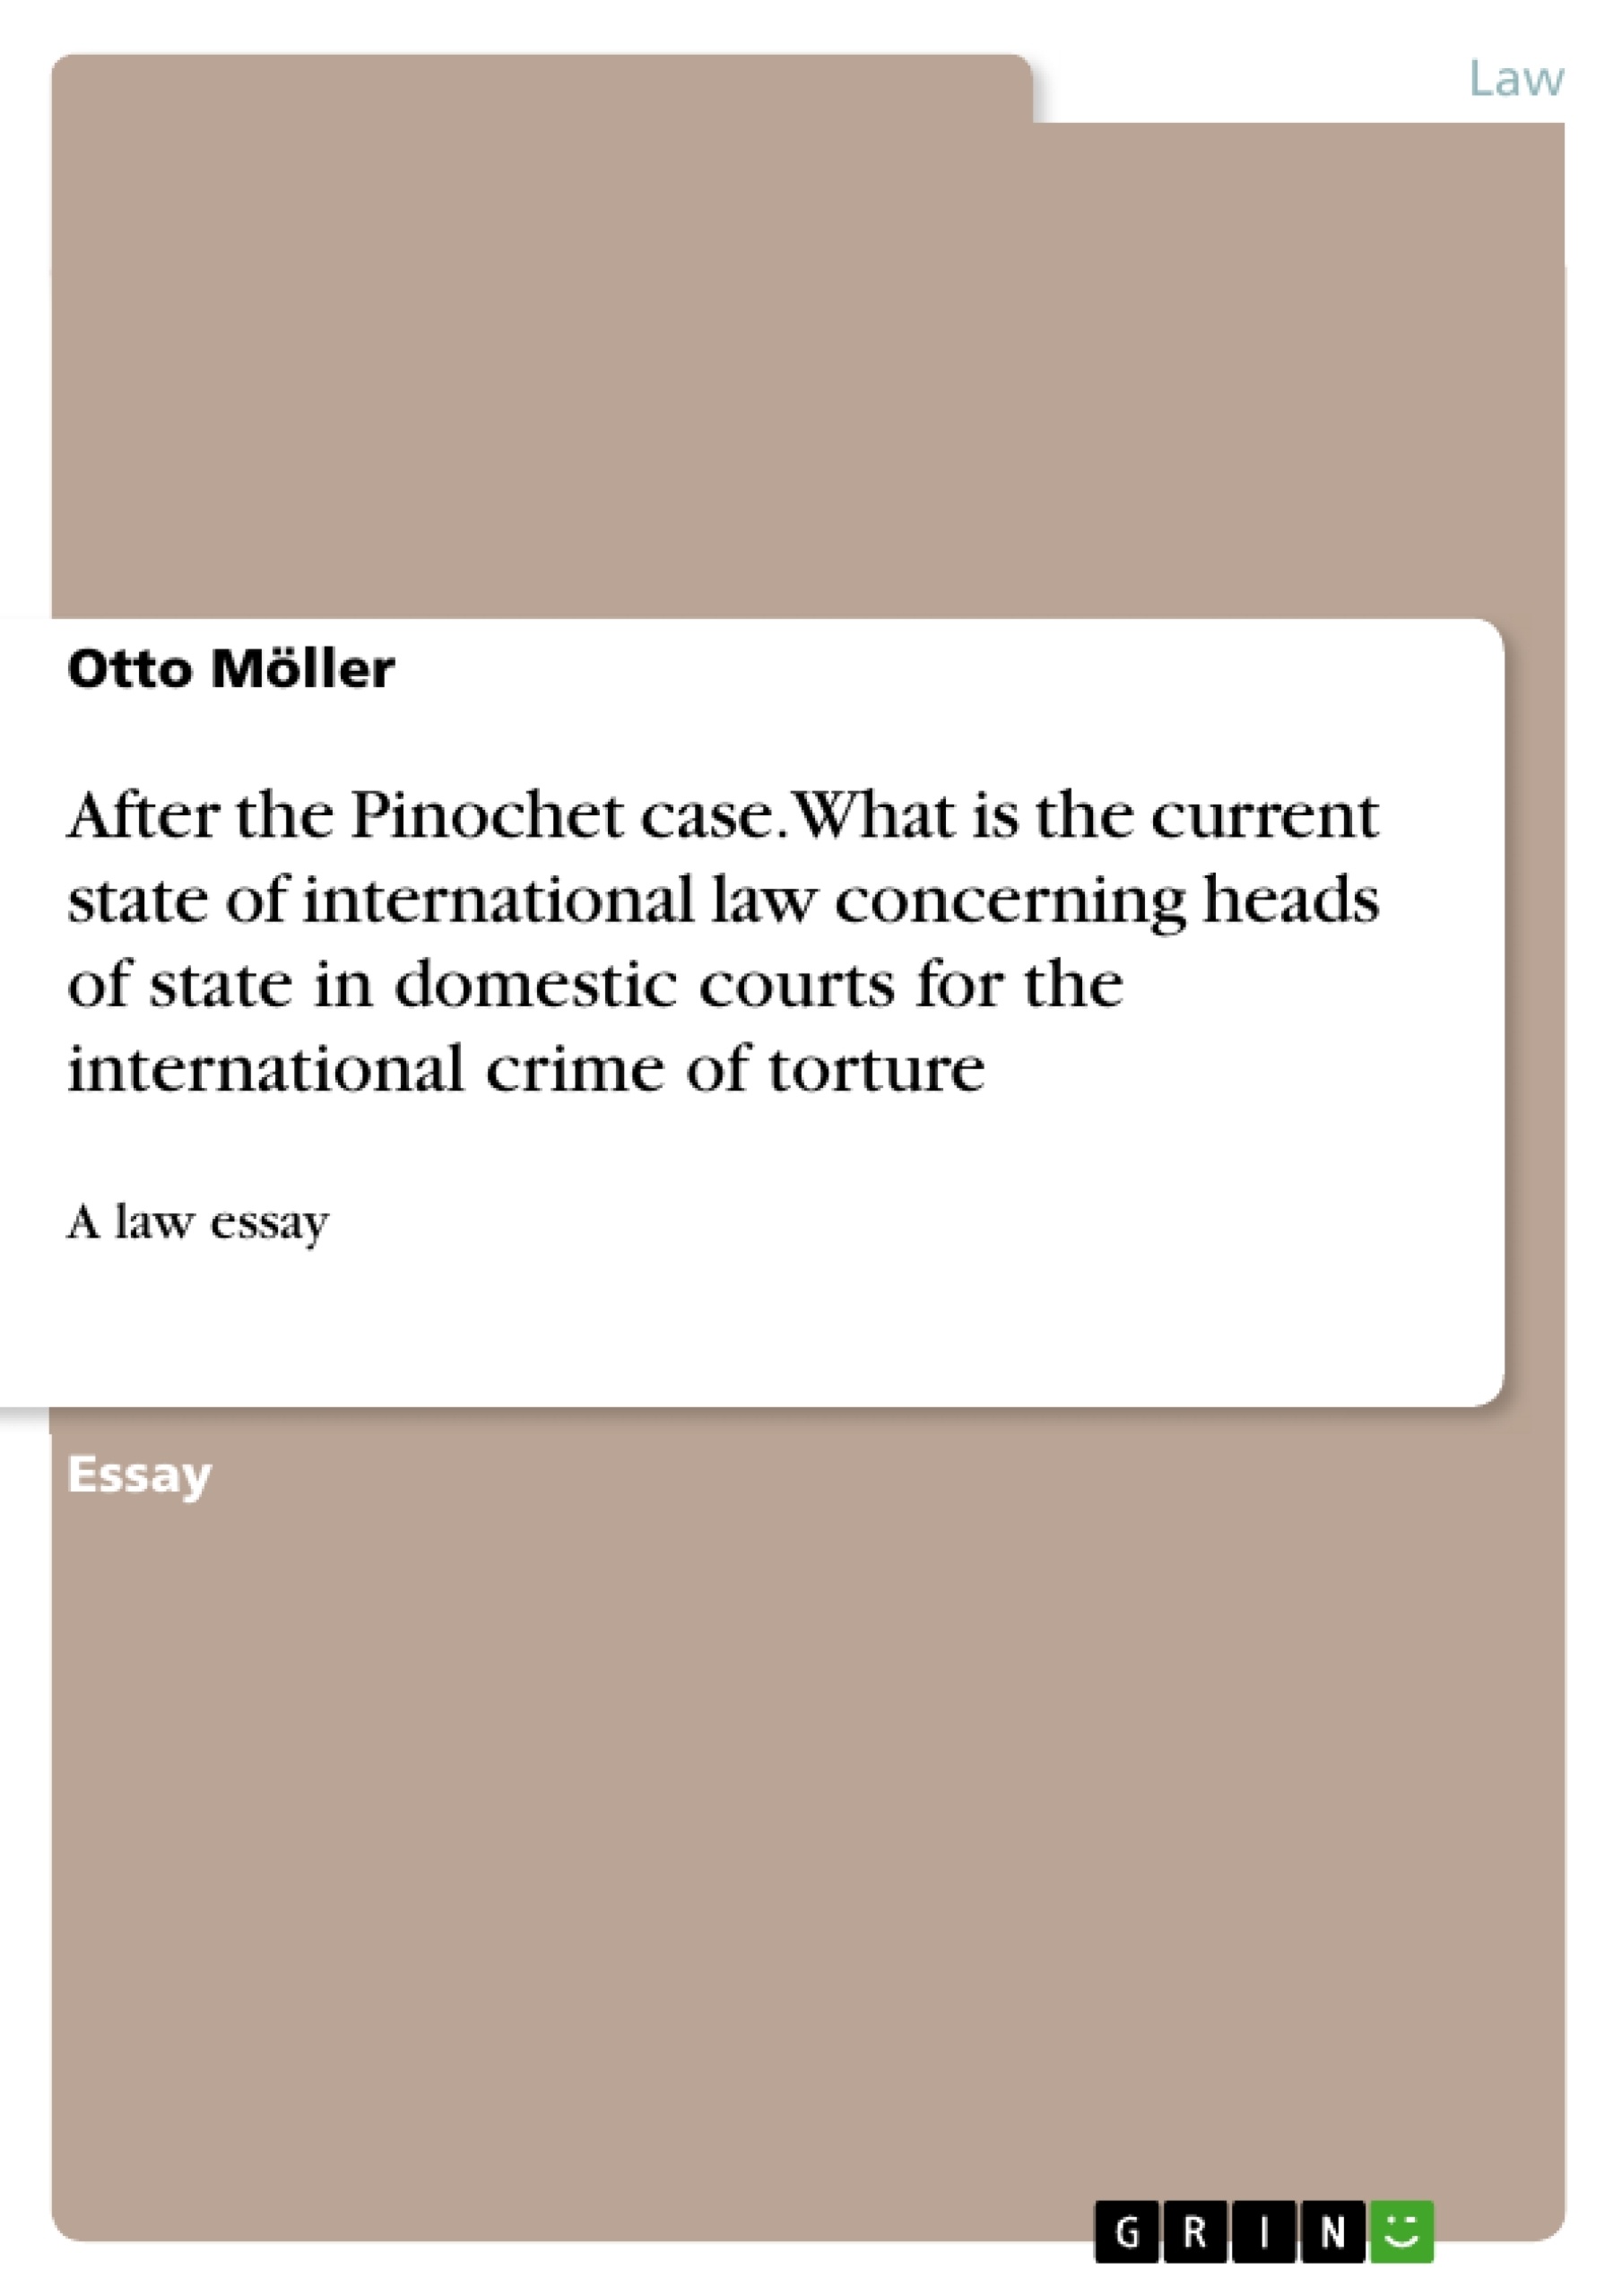 Titre: After the Pinochet case. What is the current state of international law concerning heads of state in domestic courts for the international crime of torture